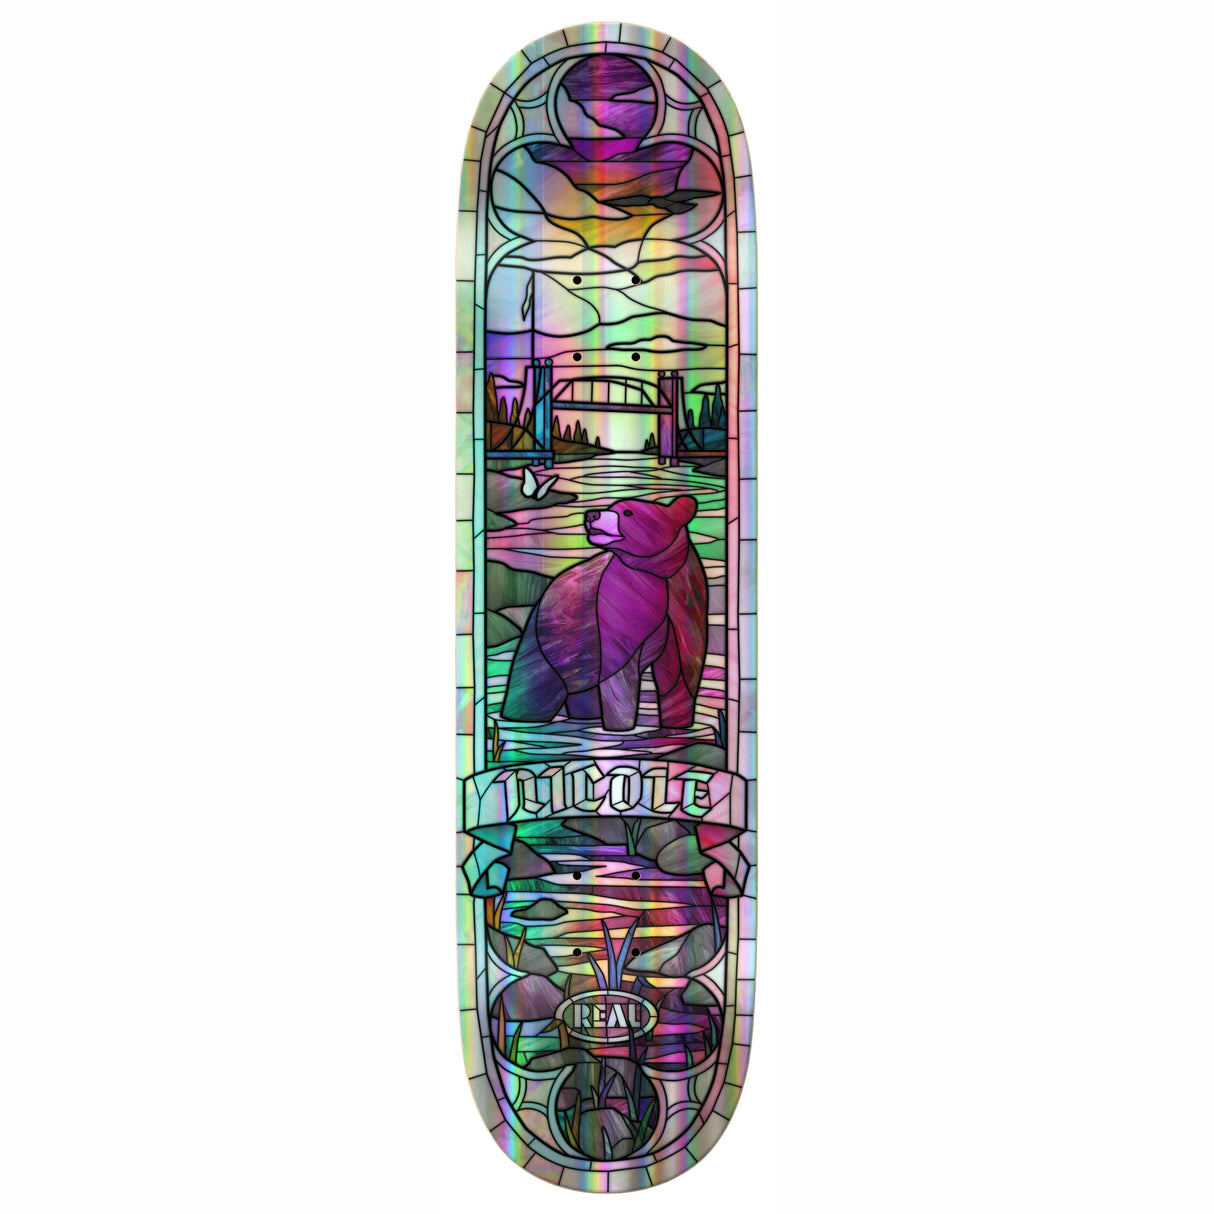 Real Nicole Cathedral Holographic Rainbow Foil 8.38" Skateboard Deck